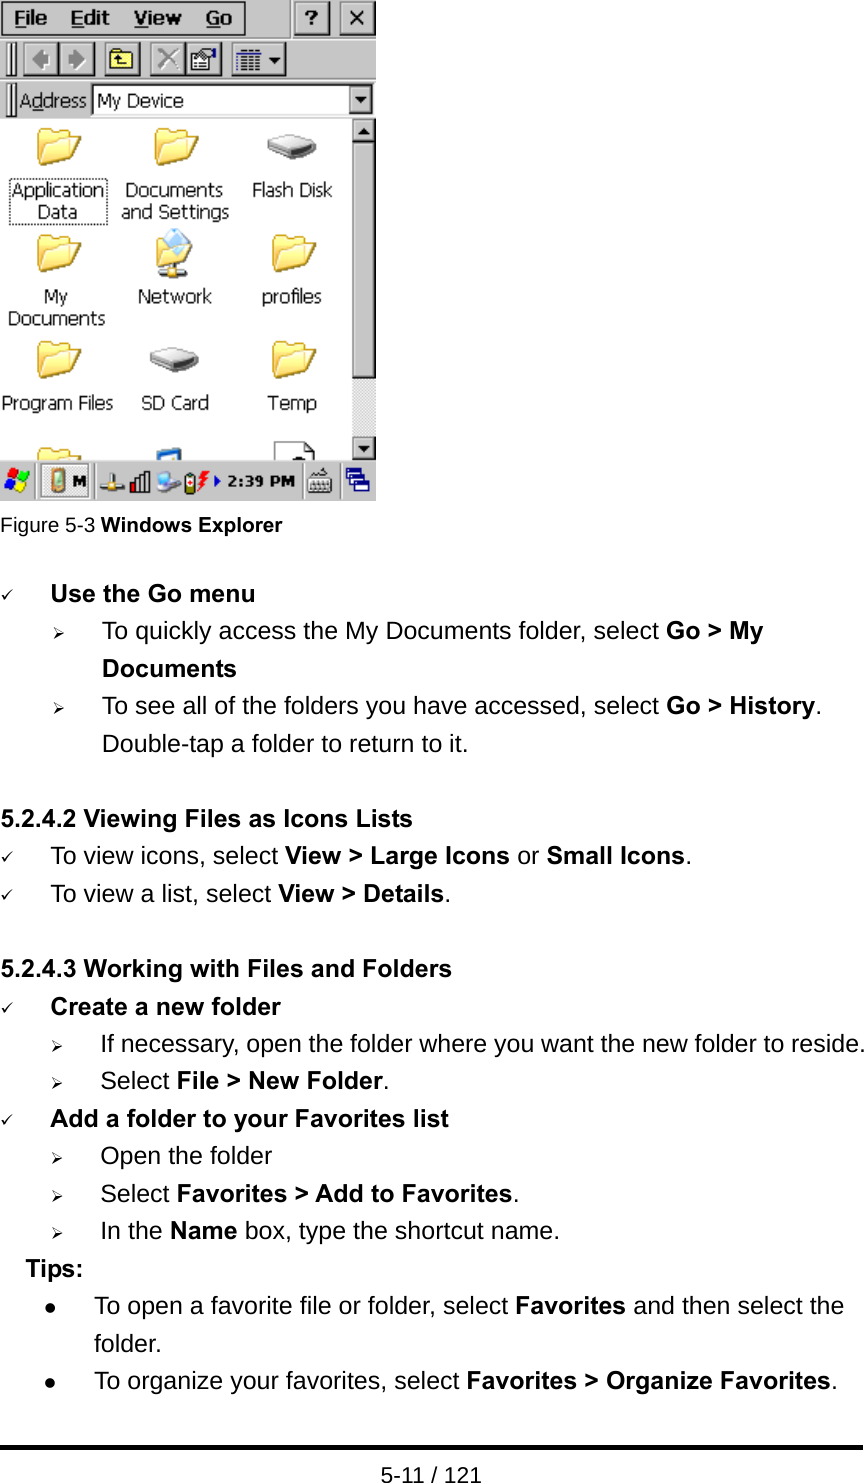  5-11 / 121  Figure 5-3 Windows Explorer  9 Use the Go menu ¾ To quickly access the My Documents folder, select Go &gt; My Documents ¾ To see all of the folders you have accessed, select Go &gt; History. Double-tap a folder to return to it.  5.2.4.2 Viewing Files as Icons Lists 9 To view icons, select View &gt; Large Icons or Small Icons. 9 To view a list, select View &gt; Details.  5.2.4.3 Working with Files and Folders 9 Create a new folder ¾ If necessary, open the folder where you want the new folder to reside. ¾ Select File &gt; New Folder. 9 Add a folder to your Favorites list ¾ Open the folder ¾ Select Favorites &gt; Add to Favorites. ¾ In the Name box, type the shortcut name.   Tips: z To open a favorite file or folder, select Favorites and then select the folder. z To organize your favorites, select Favorites &gt; Organize Favorites.  